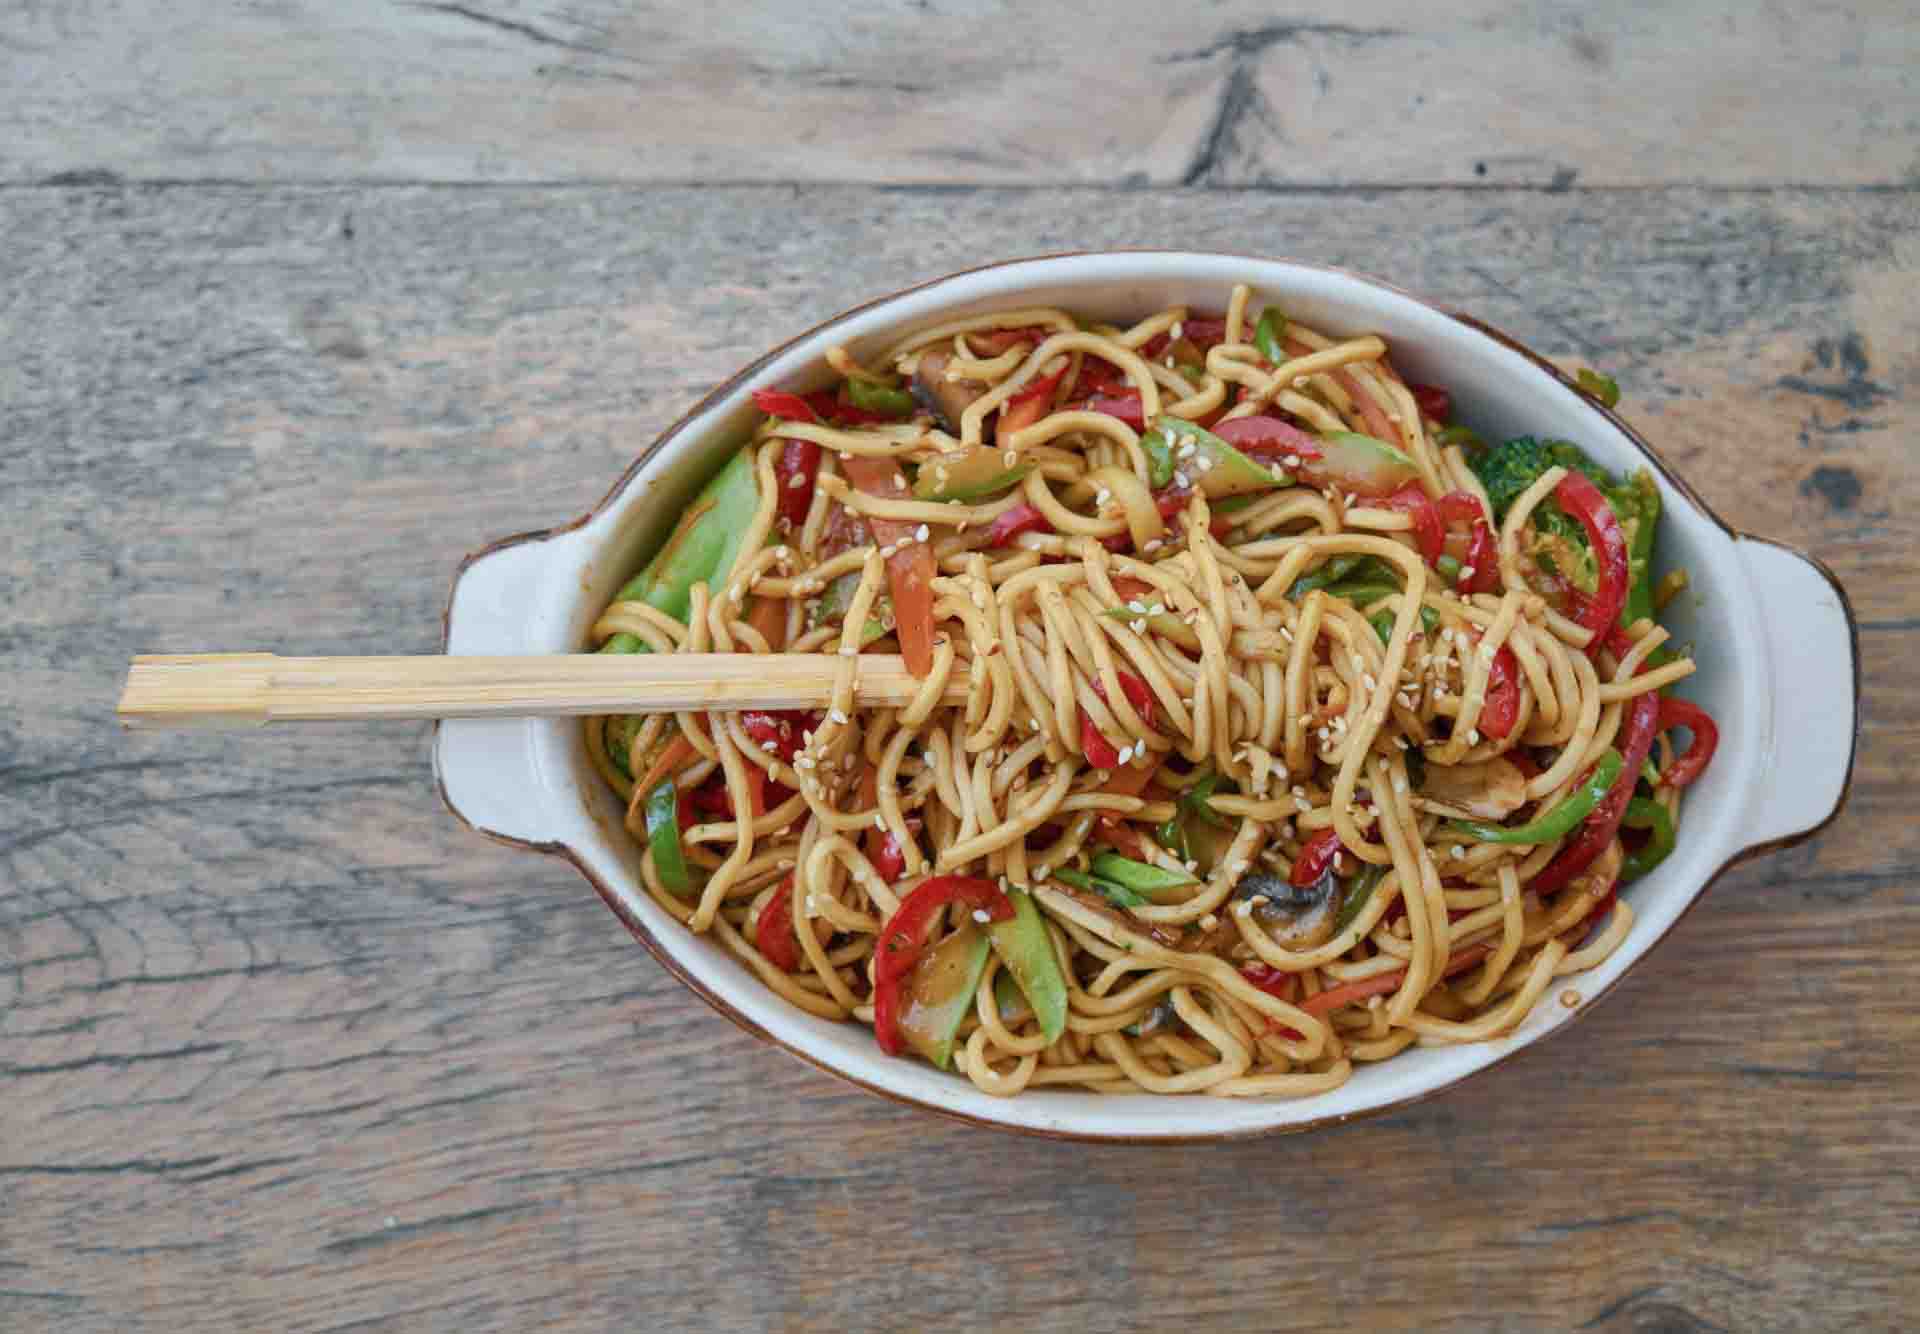 Fiery Chinese Noodles (You Po Mian)